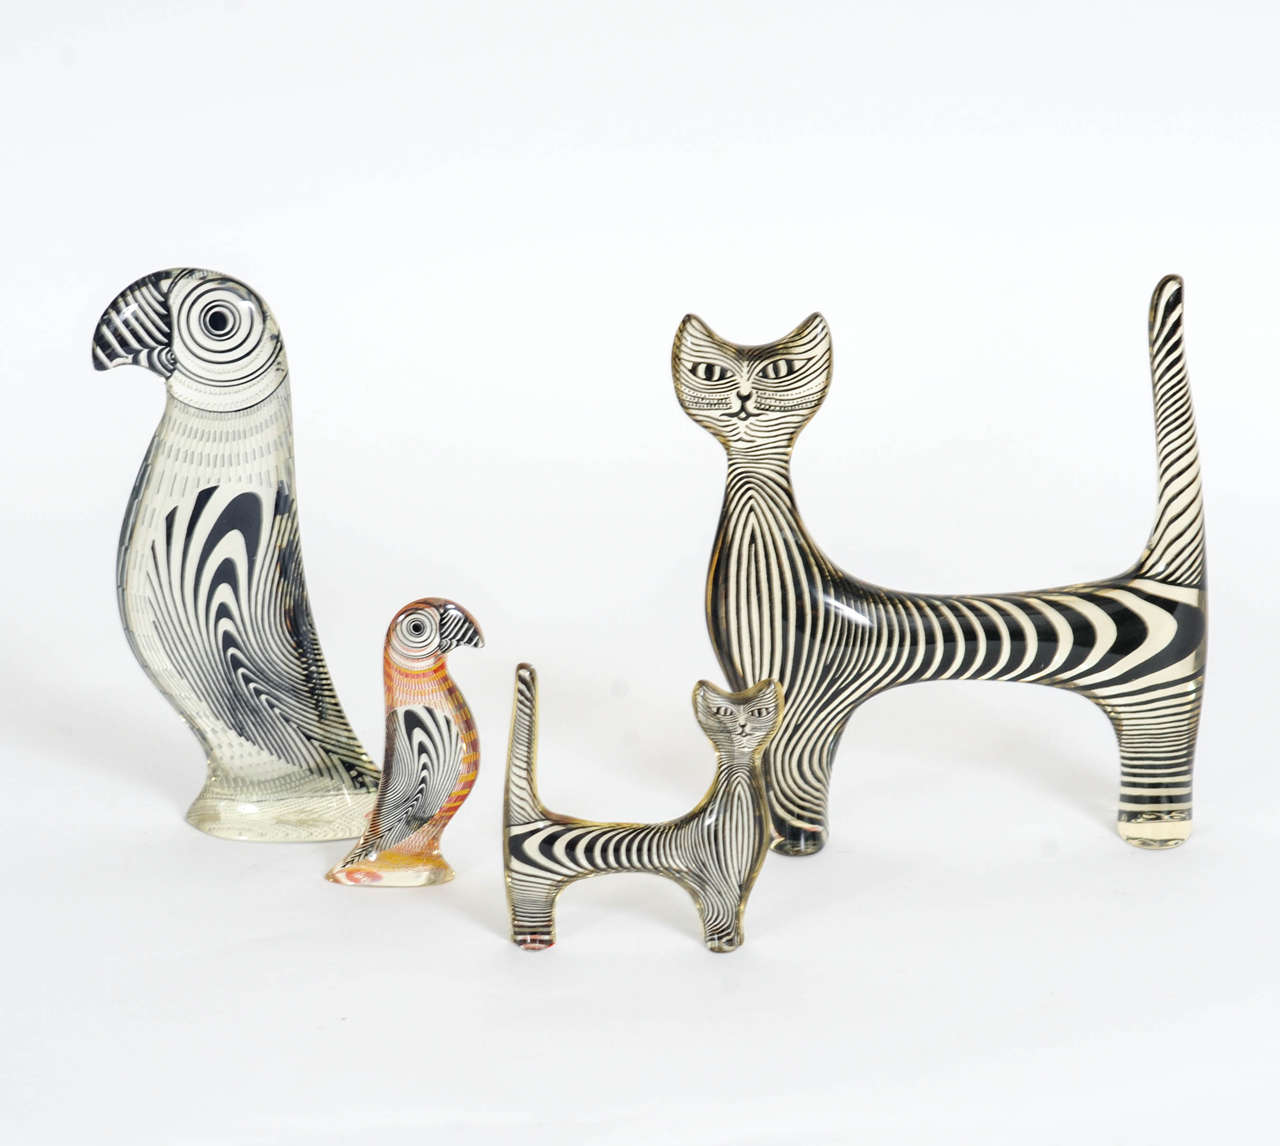 Striking combination of two black and white cats and two puffins (big one in black in white, small one in technicolors) designed by Abraham Palatnik.

The belox mentionned dimensions are valid for the big puffin.
The small puffin: 10 cm high x 4